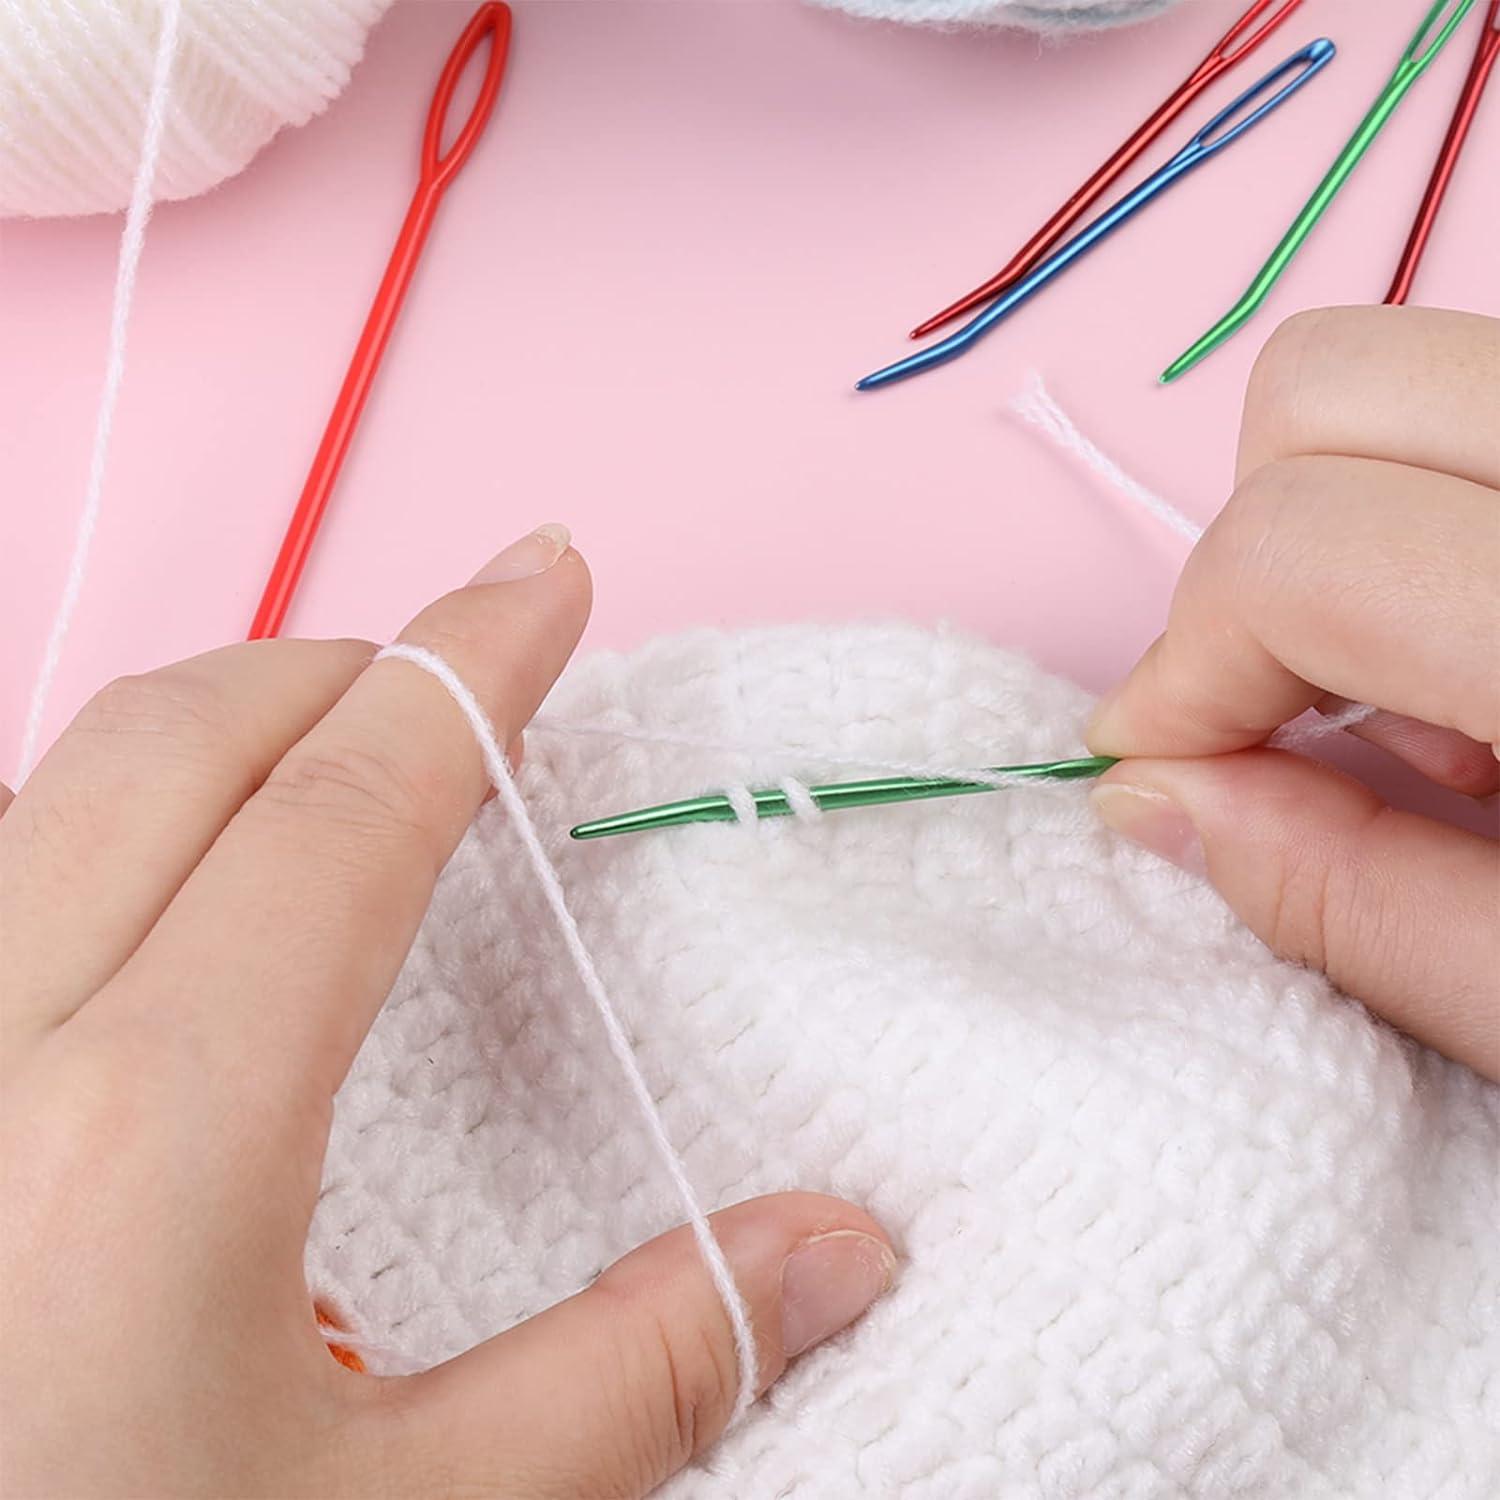 How to Crochet - How to Thread a Yarn or Tapestry Needle 